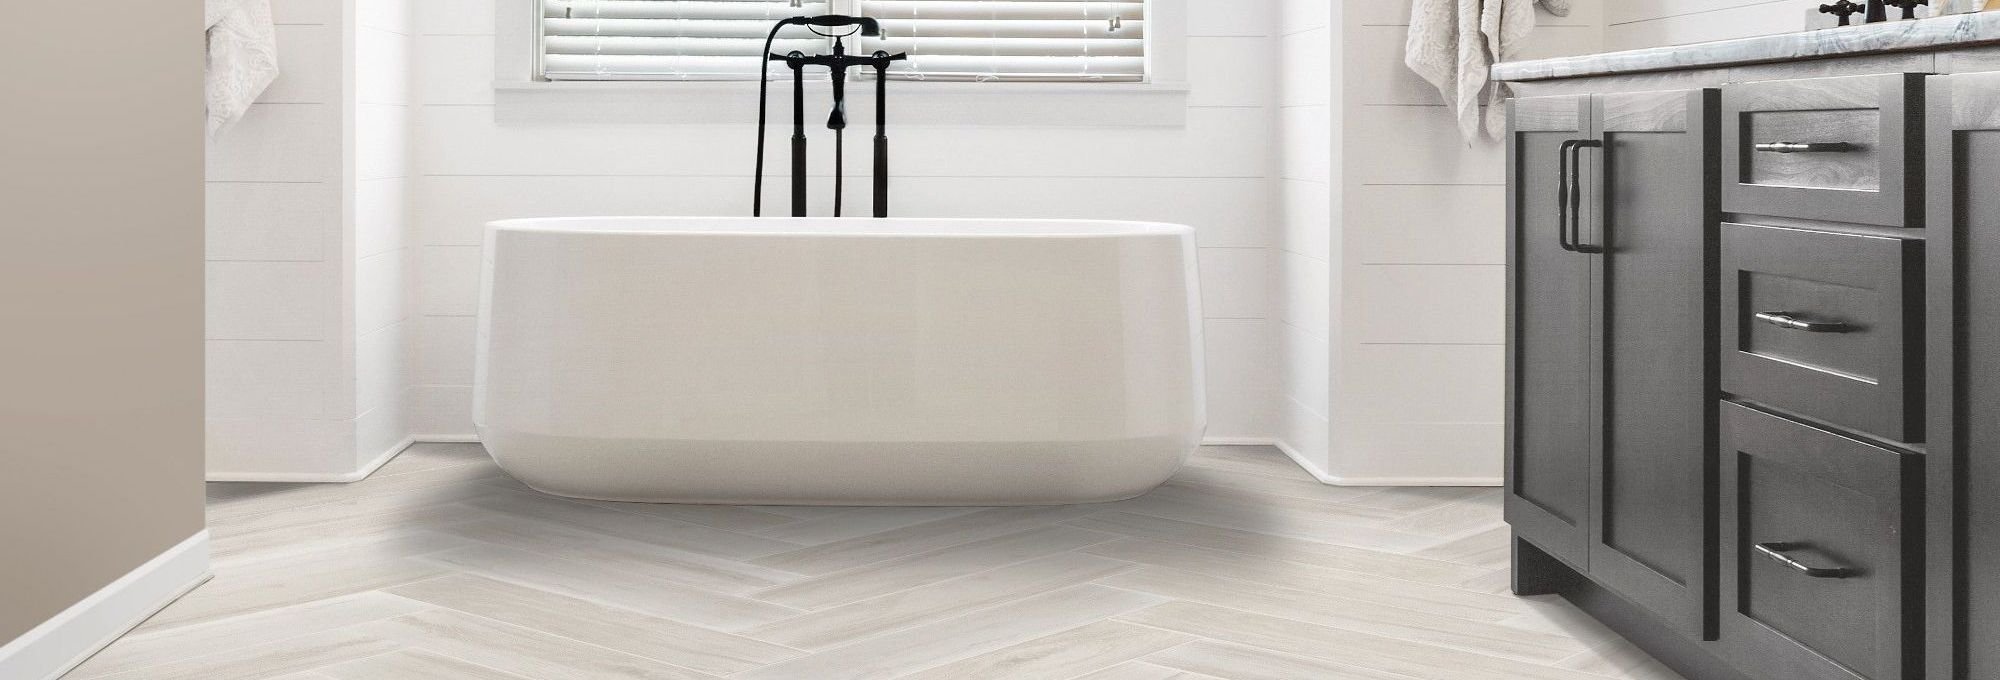 White bathtub bathroom with tiled floor from Poway Carpets in Poway, CA